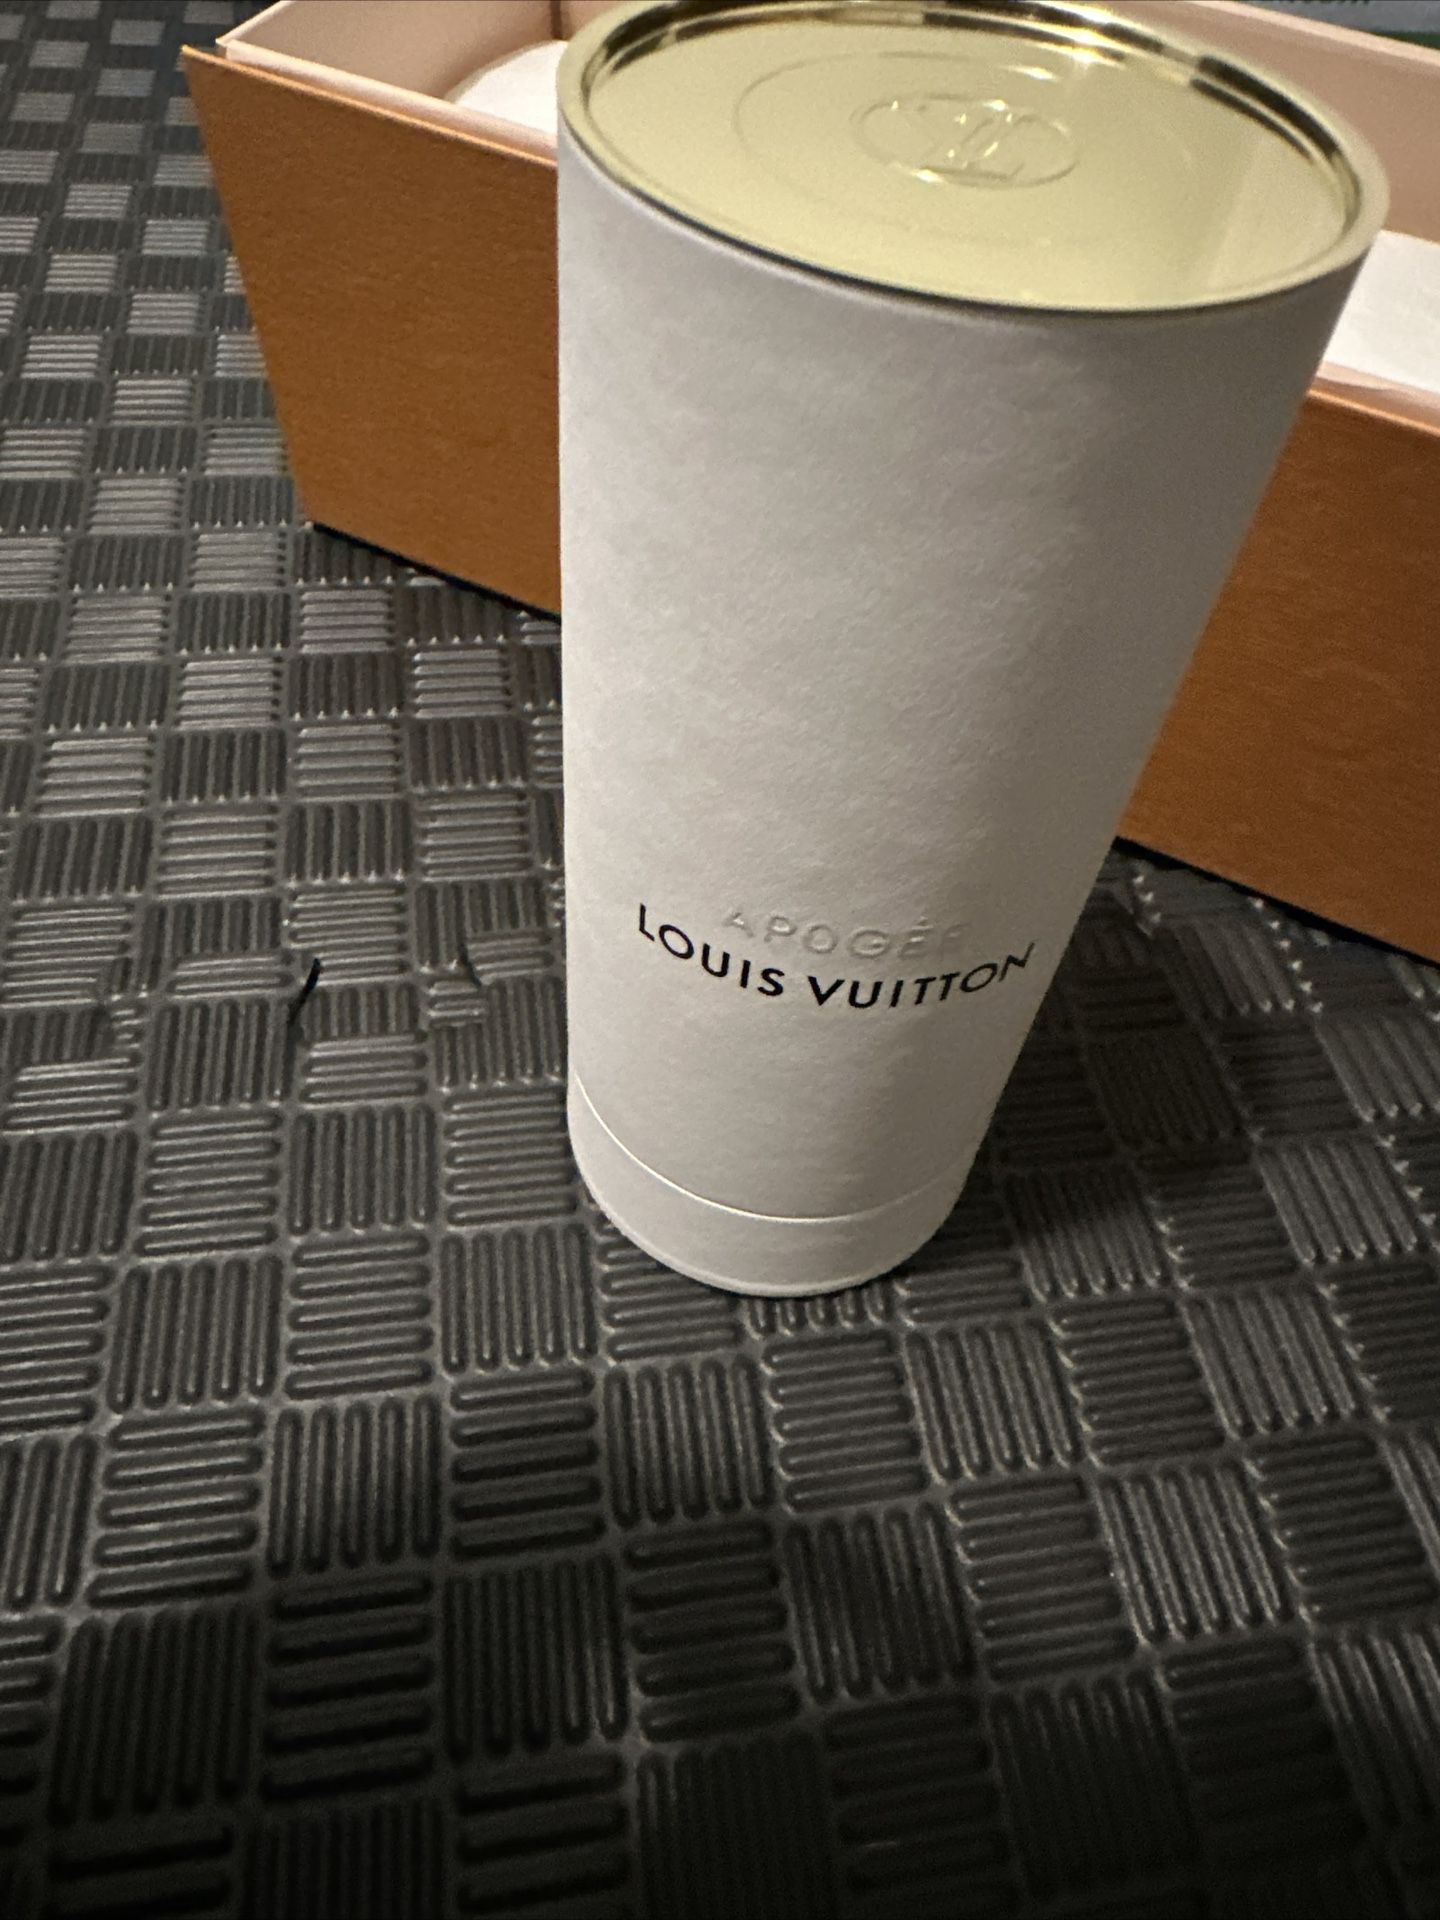 louis vuitton Perfume apogee 100ml for Sale in Chino Hills, CA